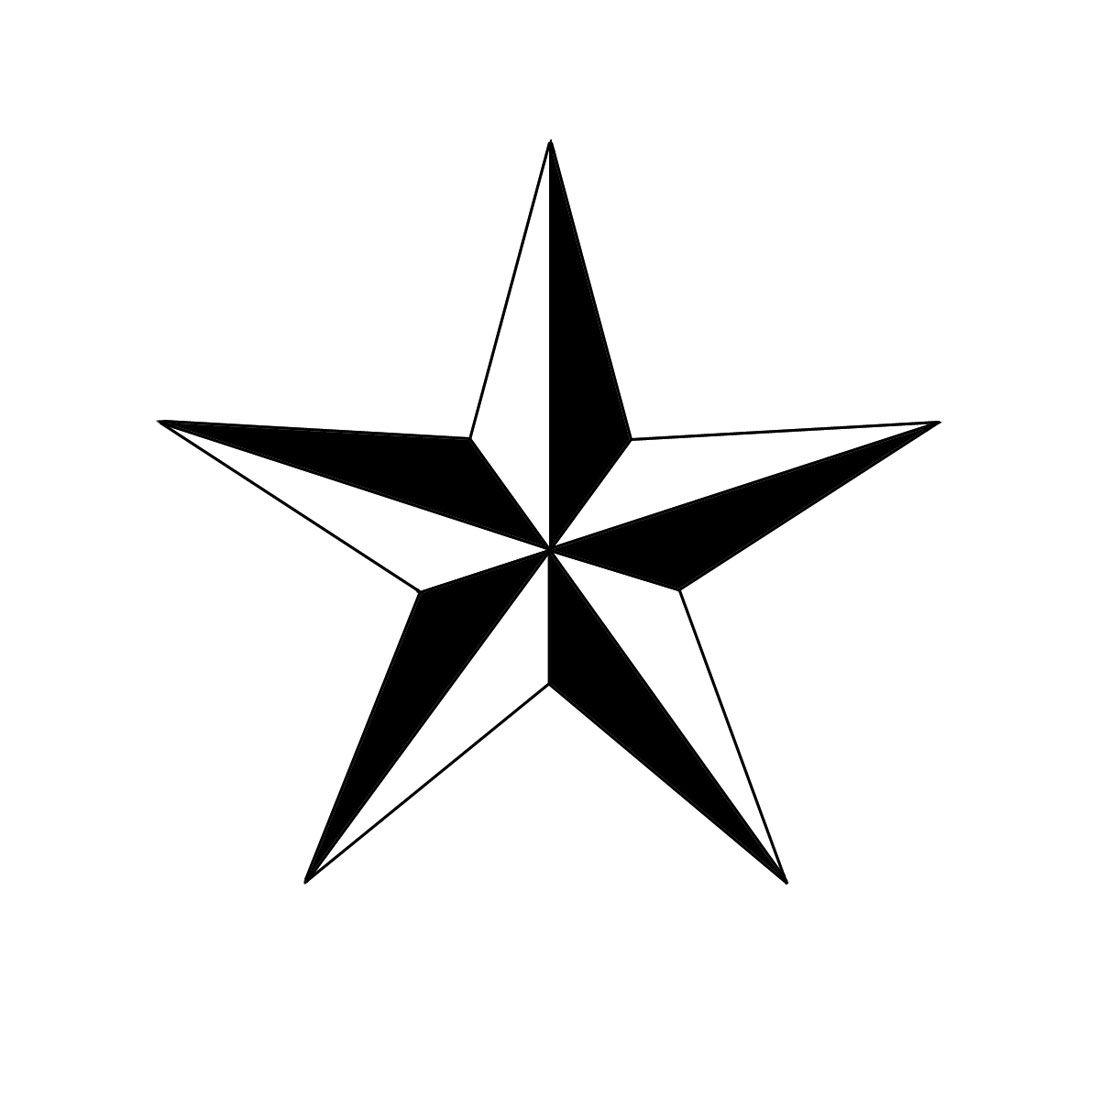 Volcom Star Logo - Nautical Star: 6 Steps (with Picture)